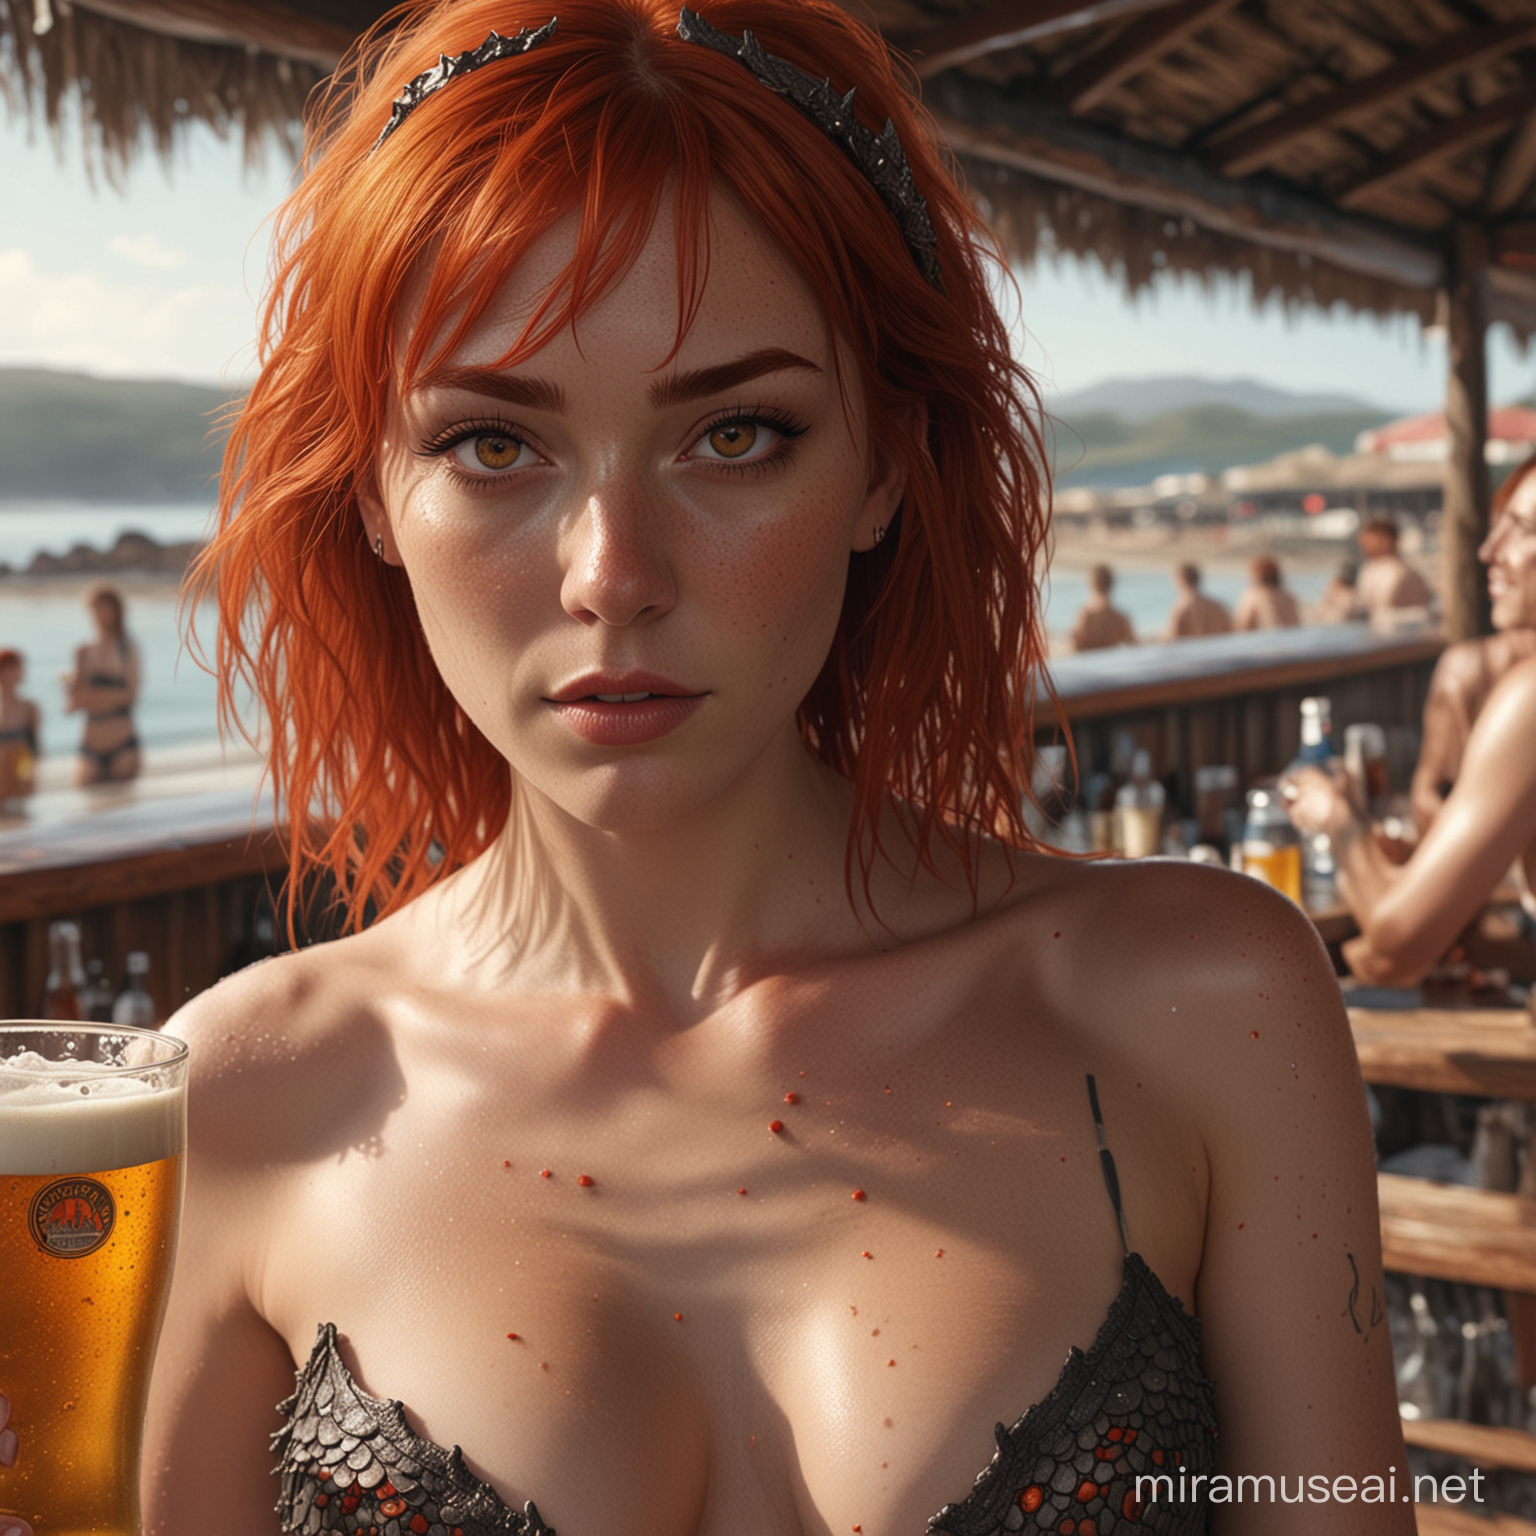 hyperrealistic very high detail 4k full body photograph taken from the left with depth perception, showing a female human with long fiery red hair thin red eyebrows, burning red eyes and face full of freckles, with dragon scales growing on arms and body, at a beach bar with a beer